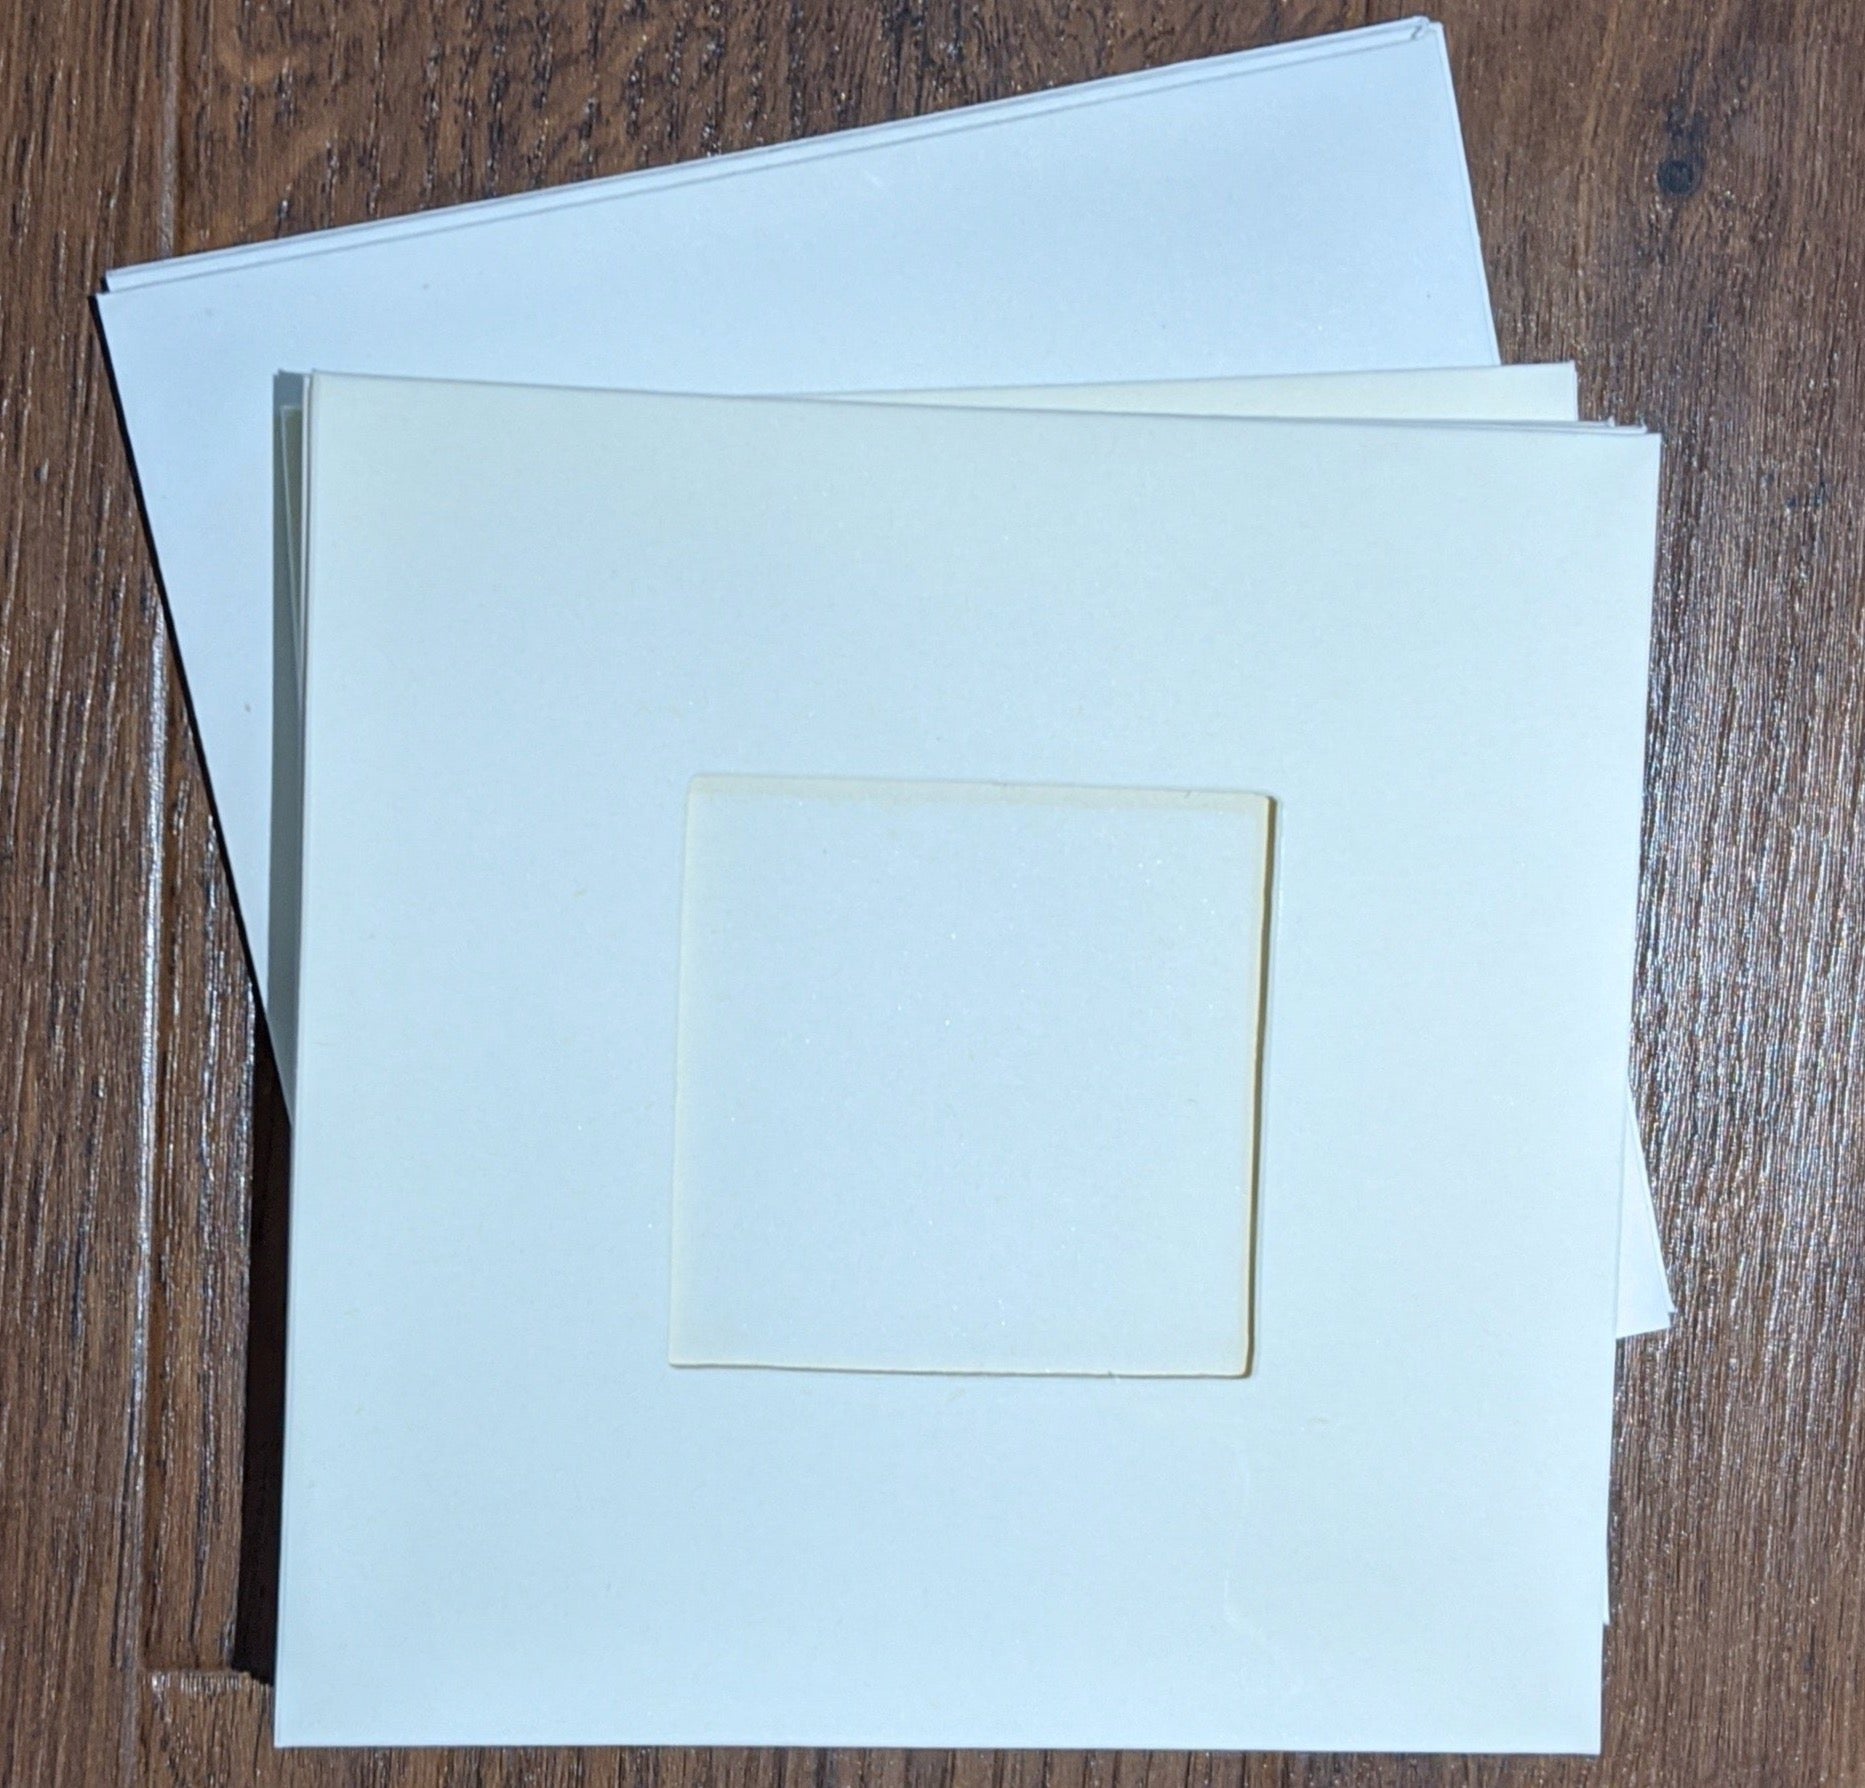 docrafts Papermania 300 gsm cream cards and envelope pack x 10 with square aperture - card size 5.3 x 5.3 inches